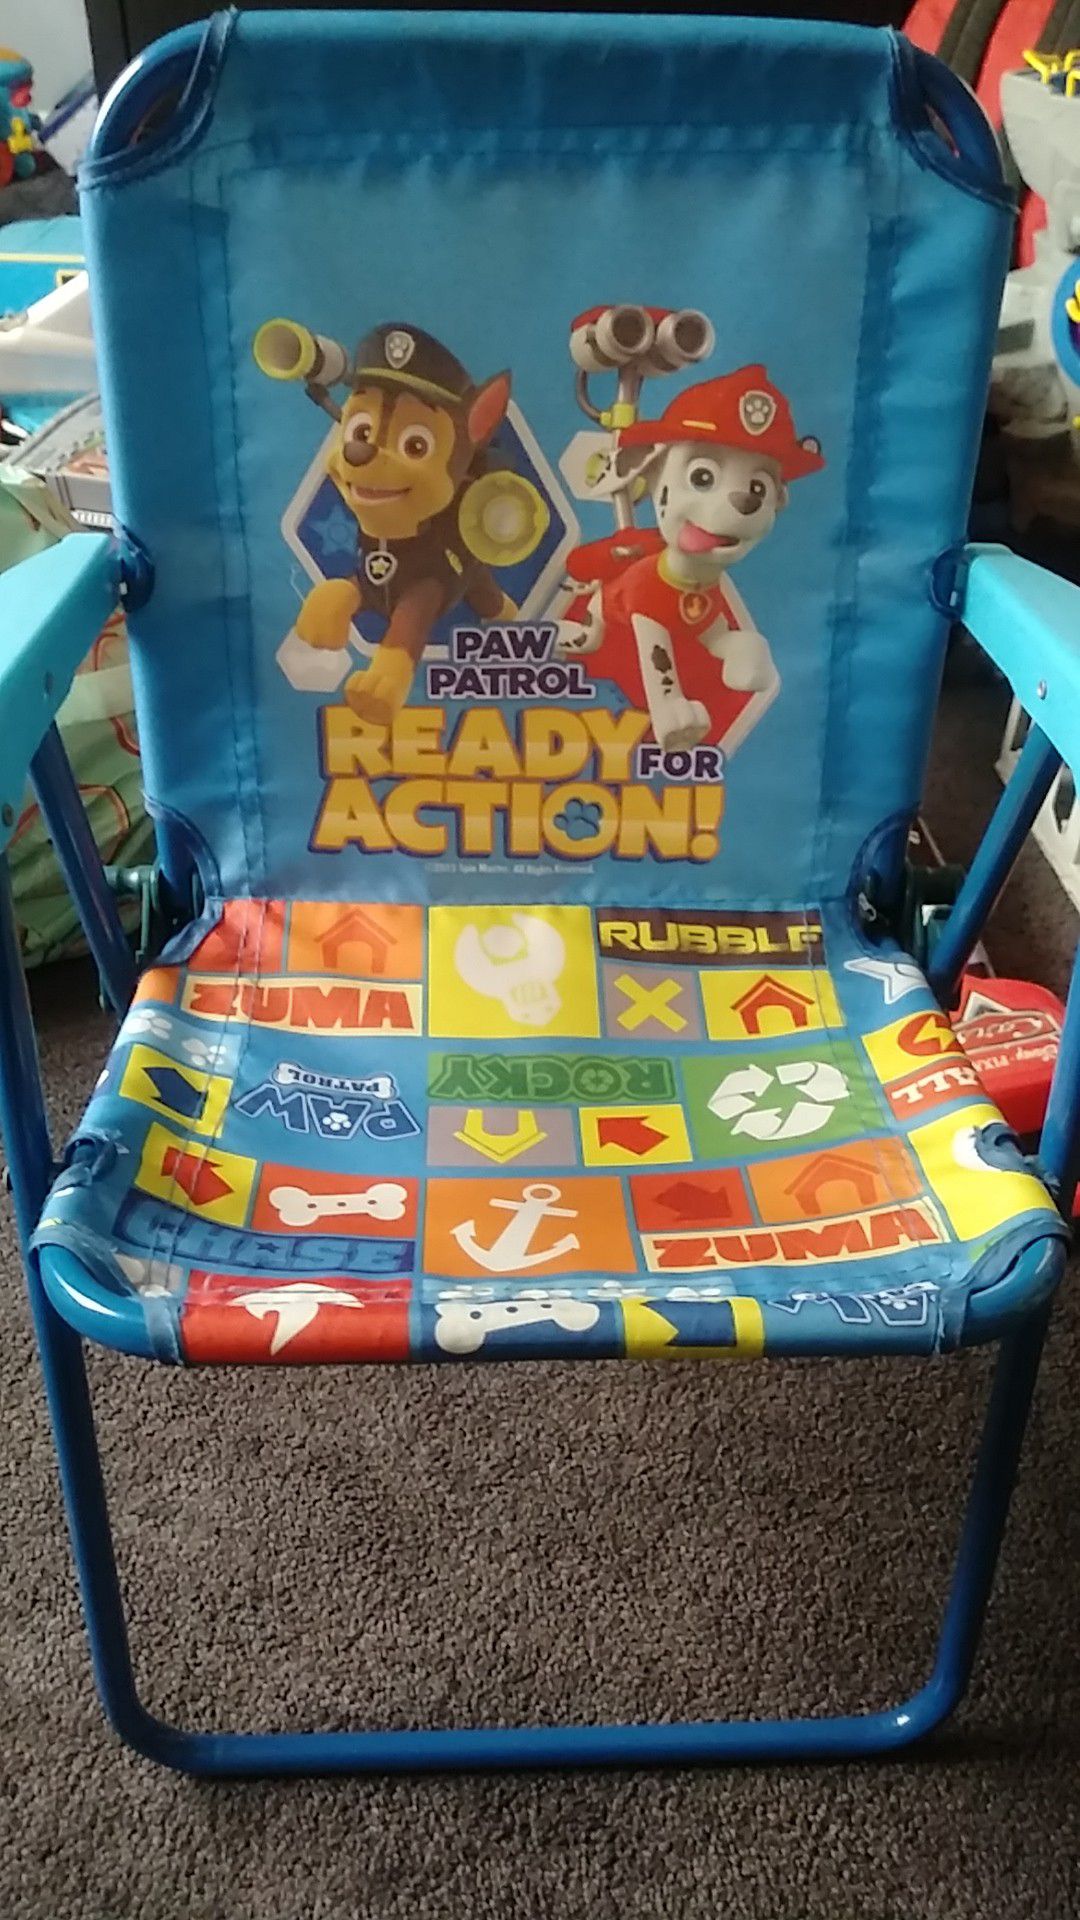 Paw patrol chair for kids